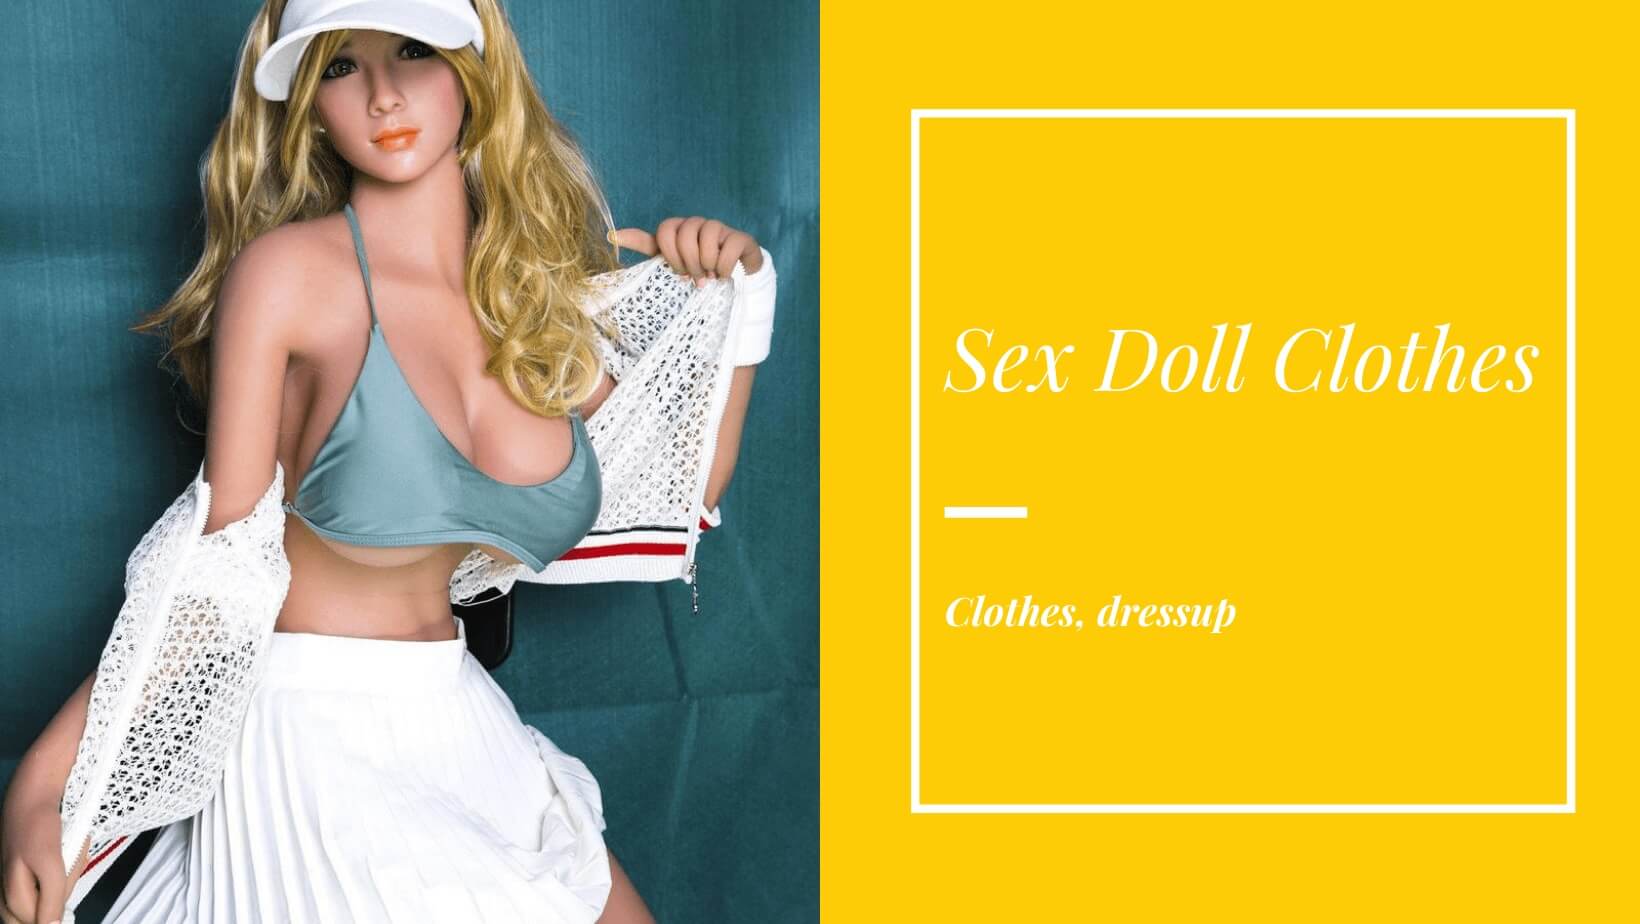 Sex doll clothes - Tpesexdoll blog